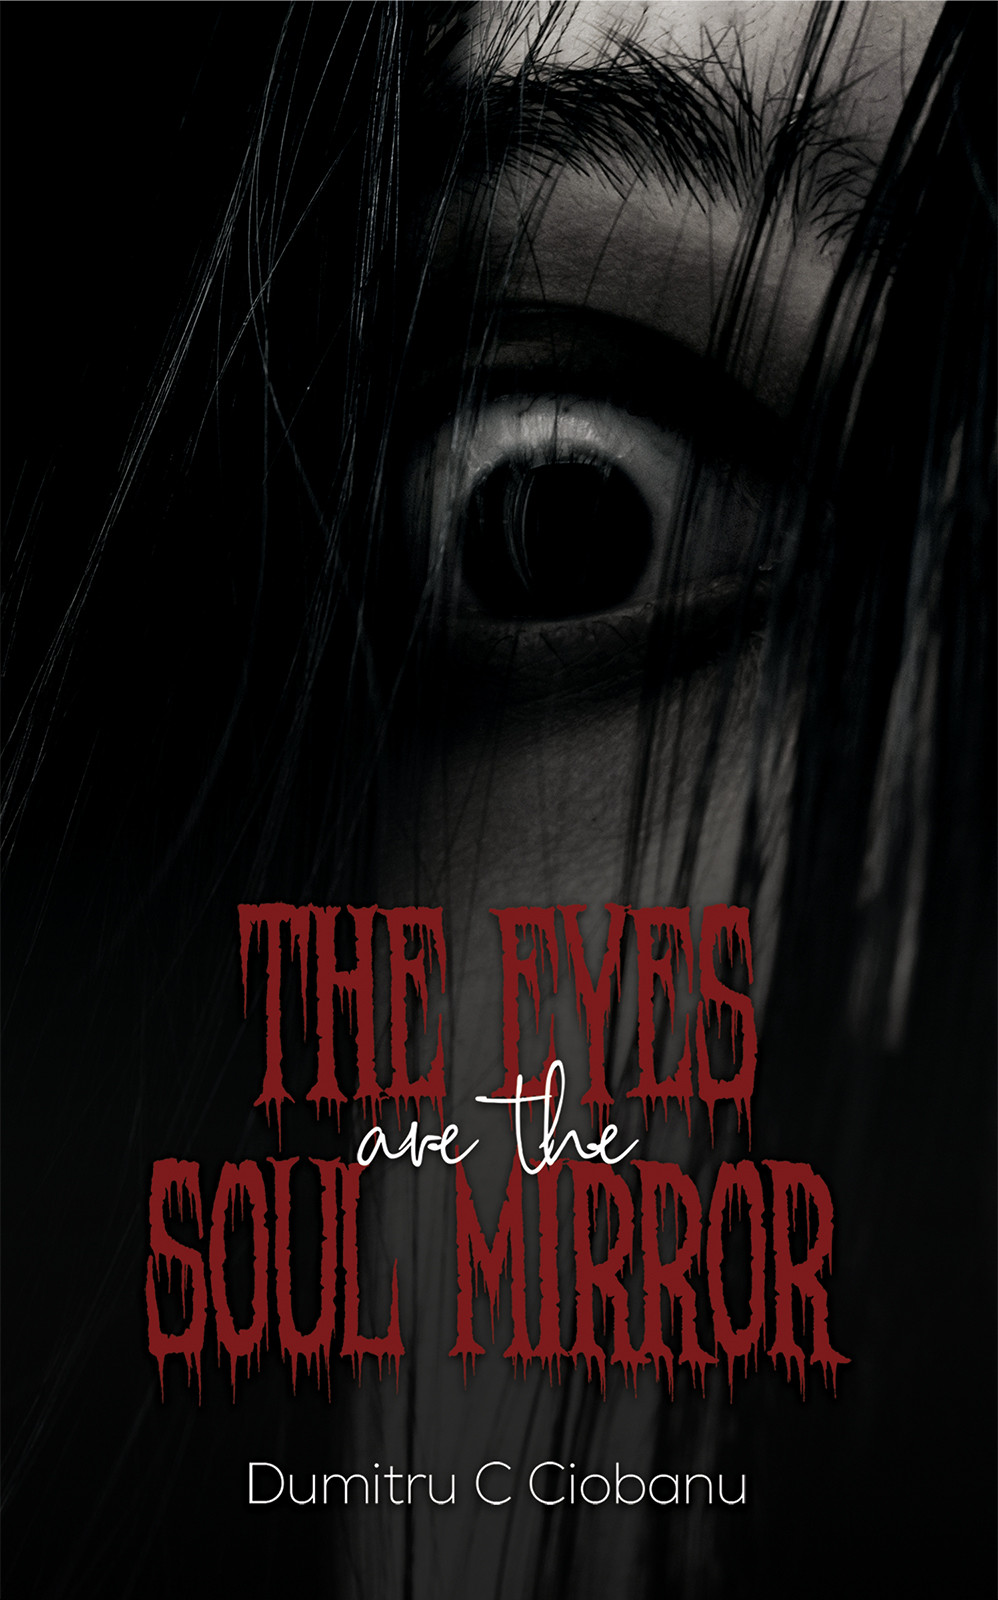 The Eyes Are the Soul Mirror